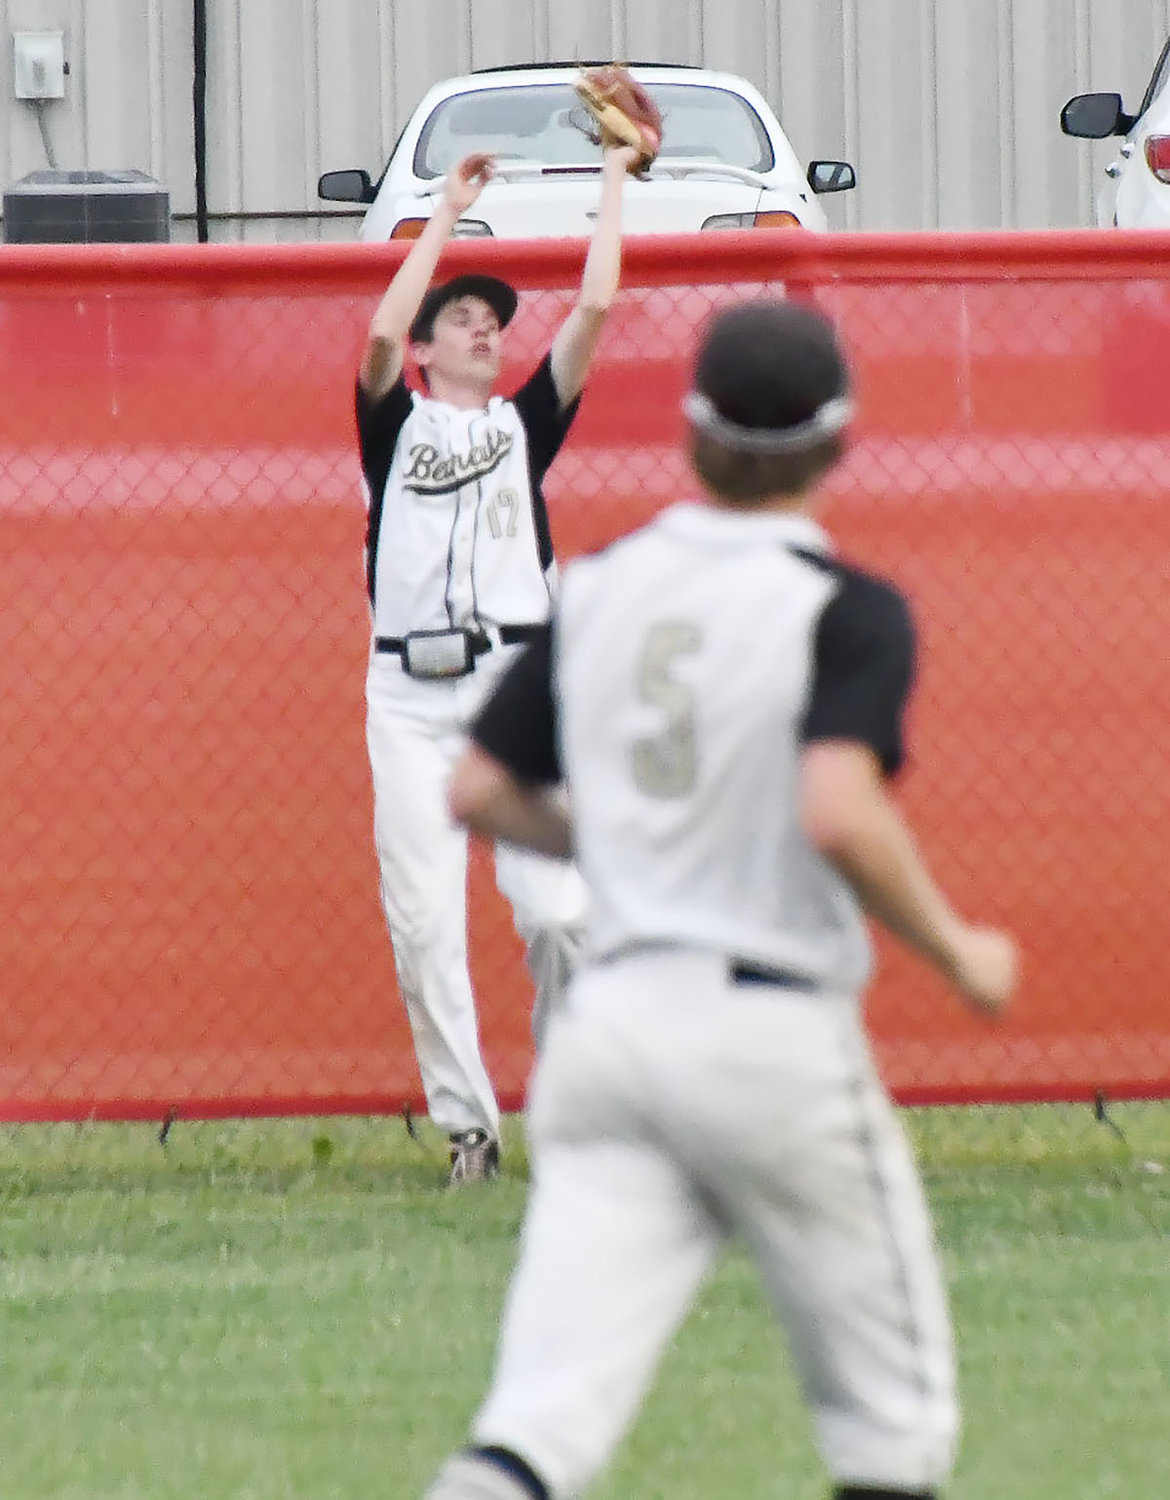 Cairo outfielder Dalton Taylor makes a crucial catch during the top of the seventh inning en route to the Bearcats' 7-6 victory over Northwest at General Omar Bradley Field on Wednesday, May 25.